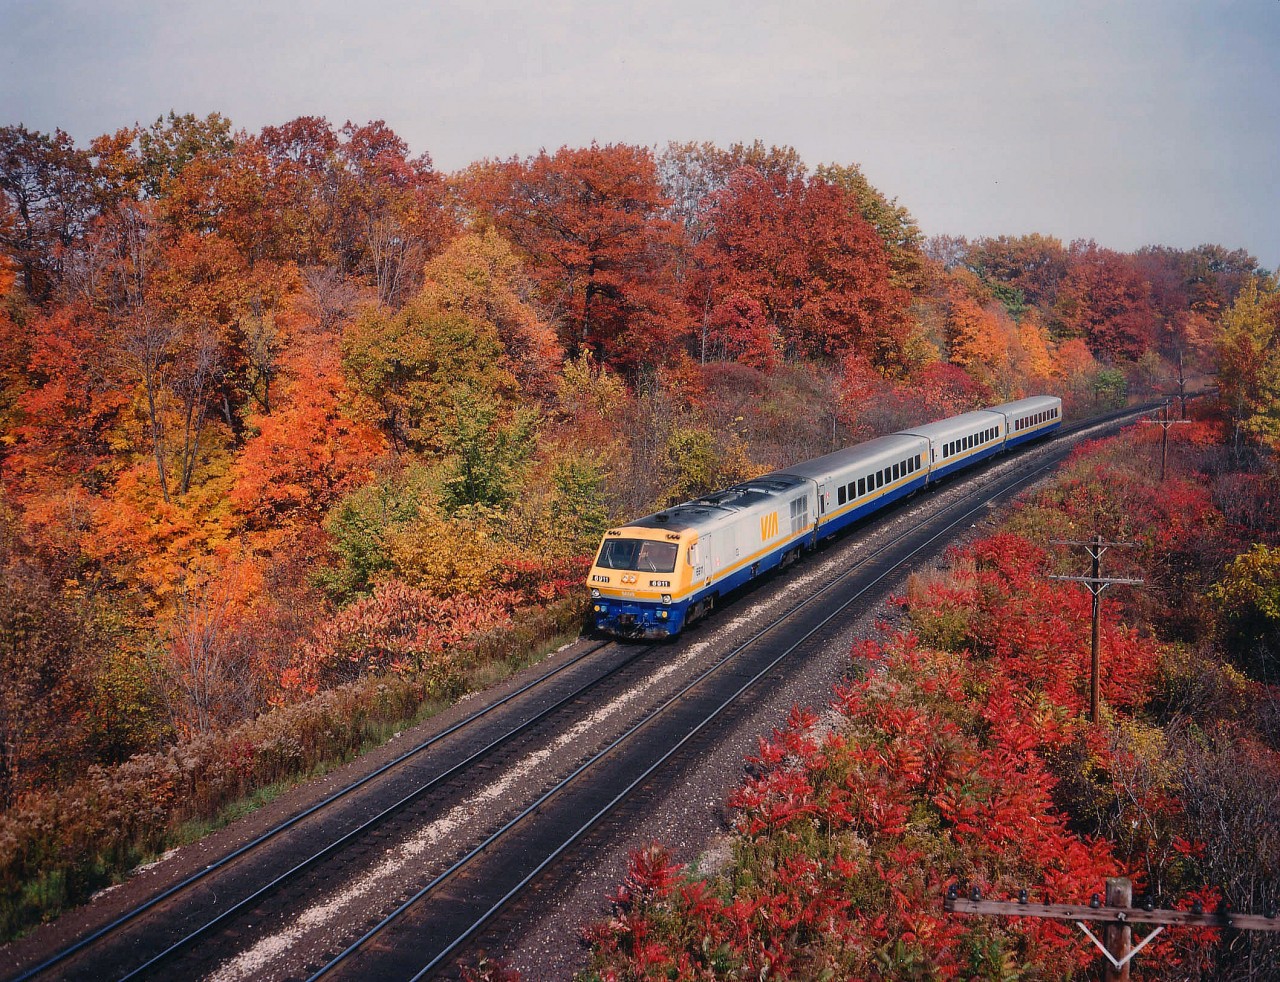 Sleek machines, these Bombardier LRCs. Too bad they were not all that reliable and, after being produced back in 1981-1982 for VIA (6900-6930) they were already retired from VIA by the end of 2002. (Toronto Railway Historical Association saved 6917) Plenty of the coaches that made up these trainsets are still in service, however. This view, from Hwy 2 Plains Road bridge out near Bayview Junction is of the poorly patronized mid-afternoon #83.  It has since been cut.